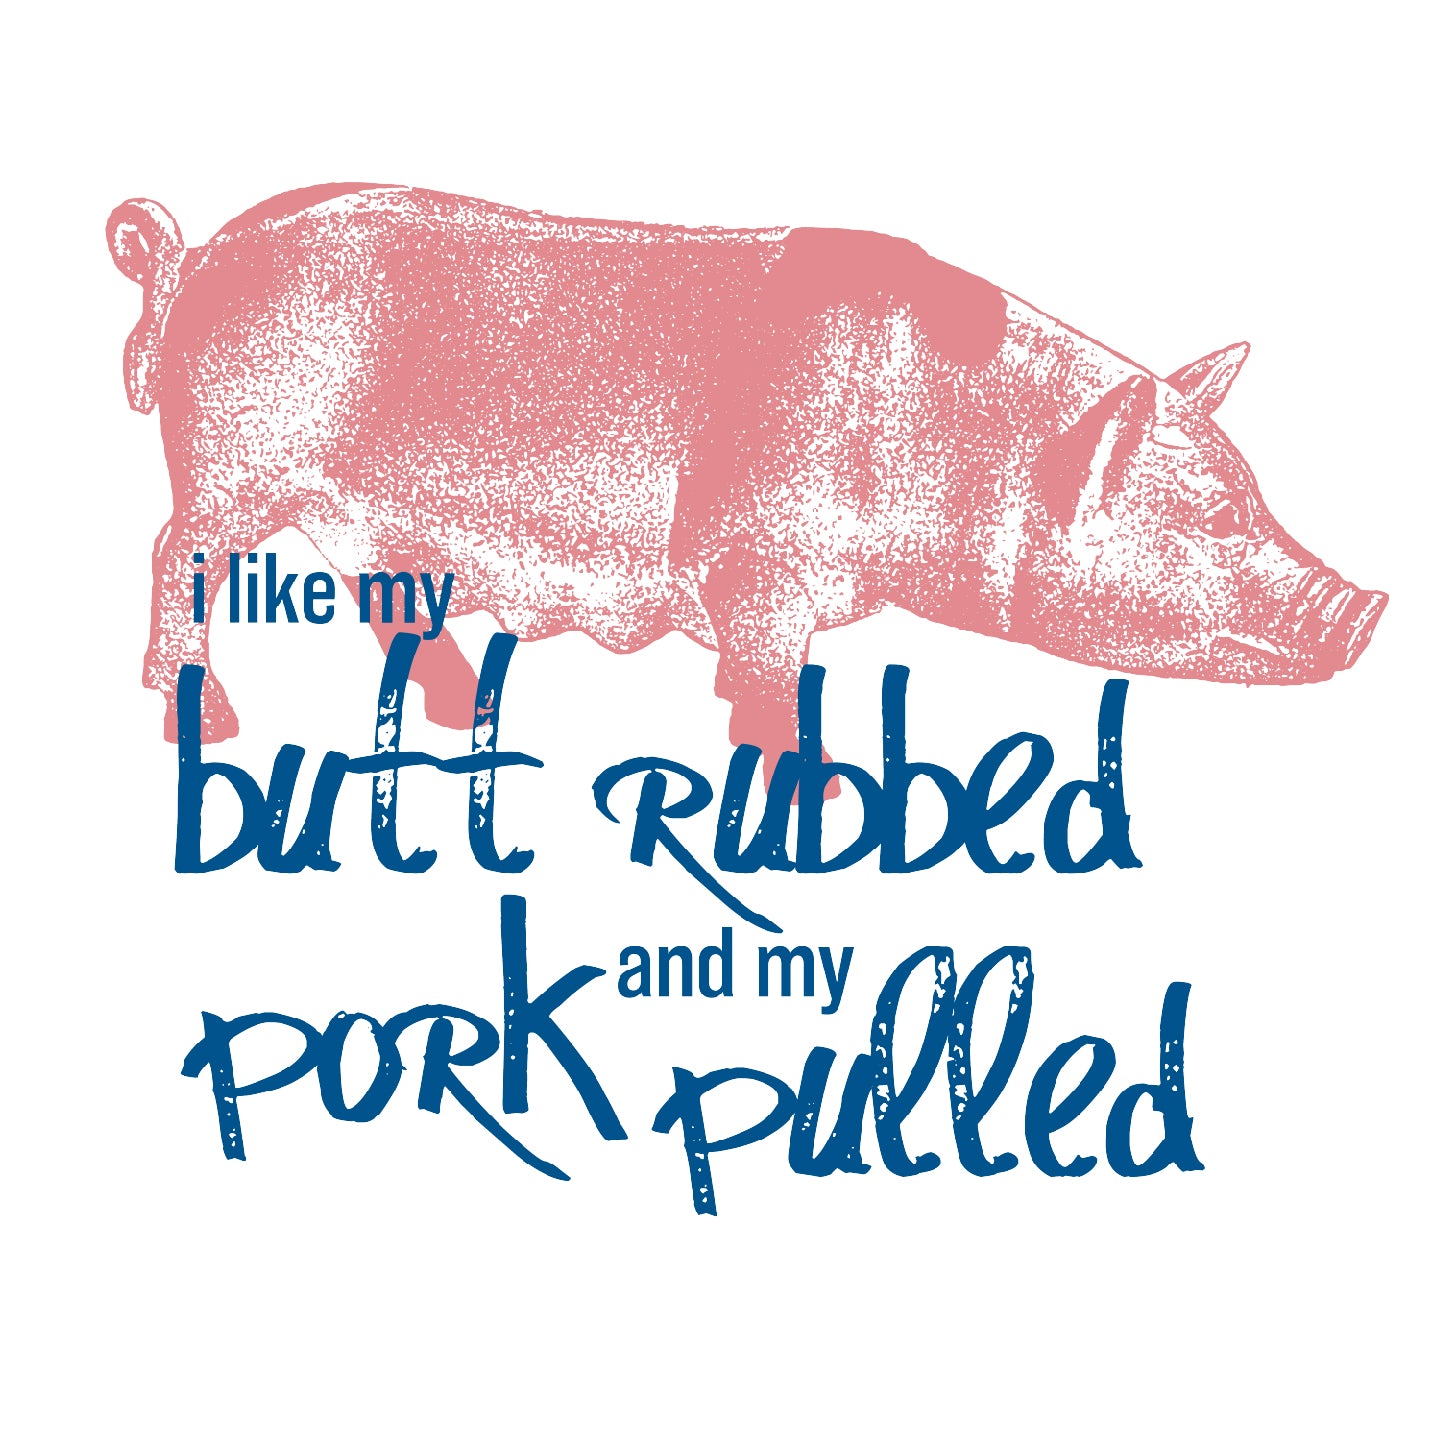 I Like my butt rubbed, and my pork pulled.